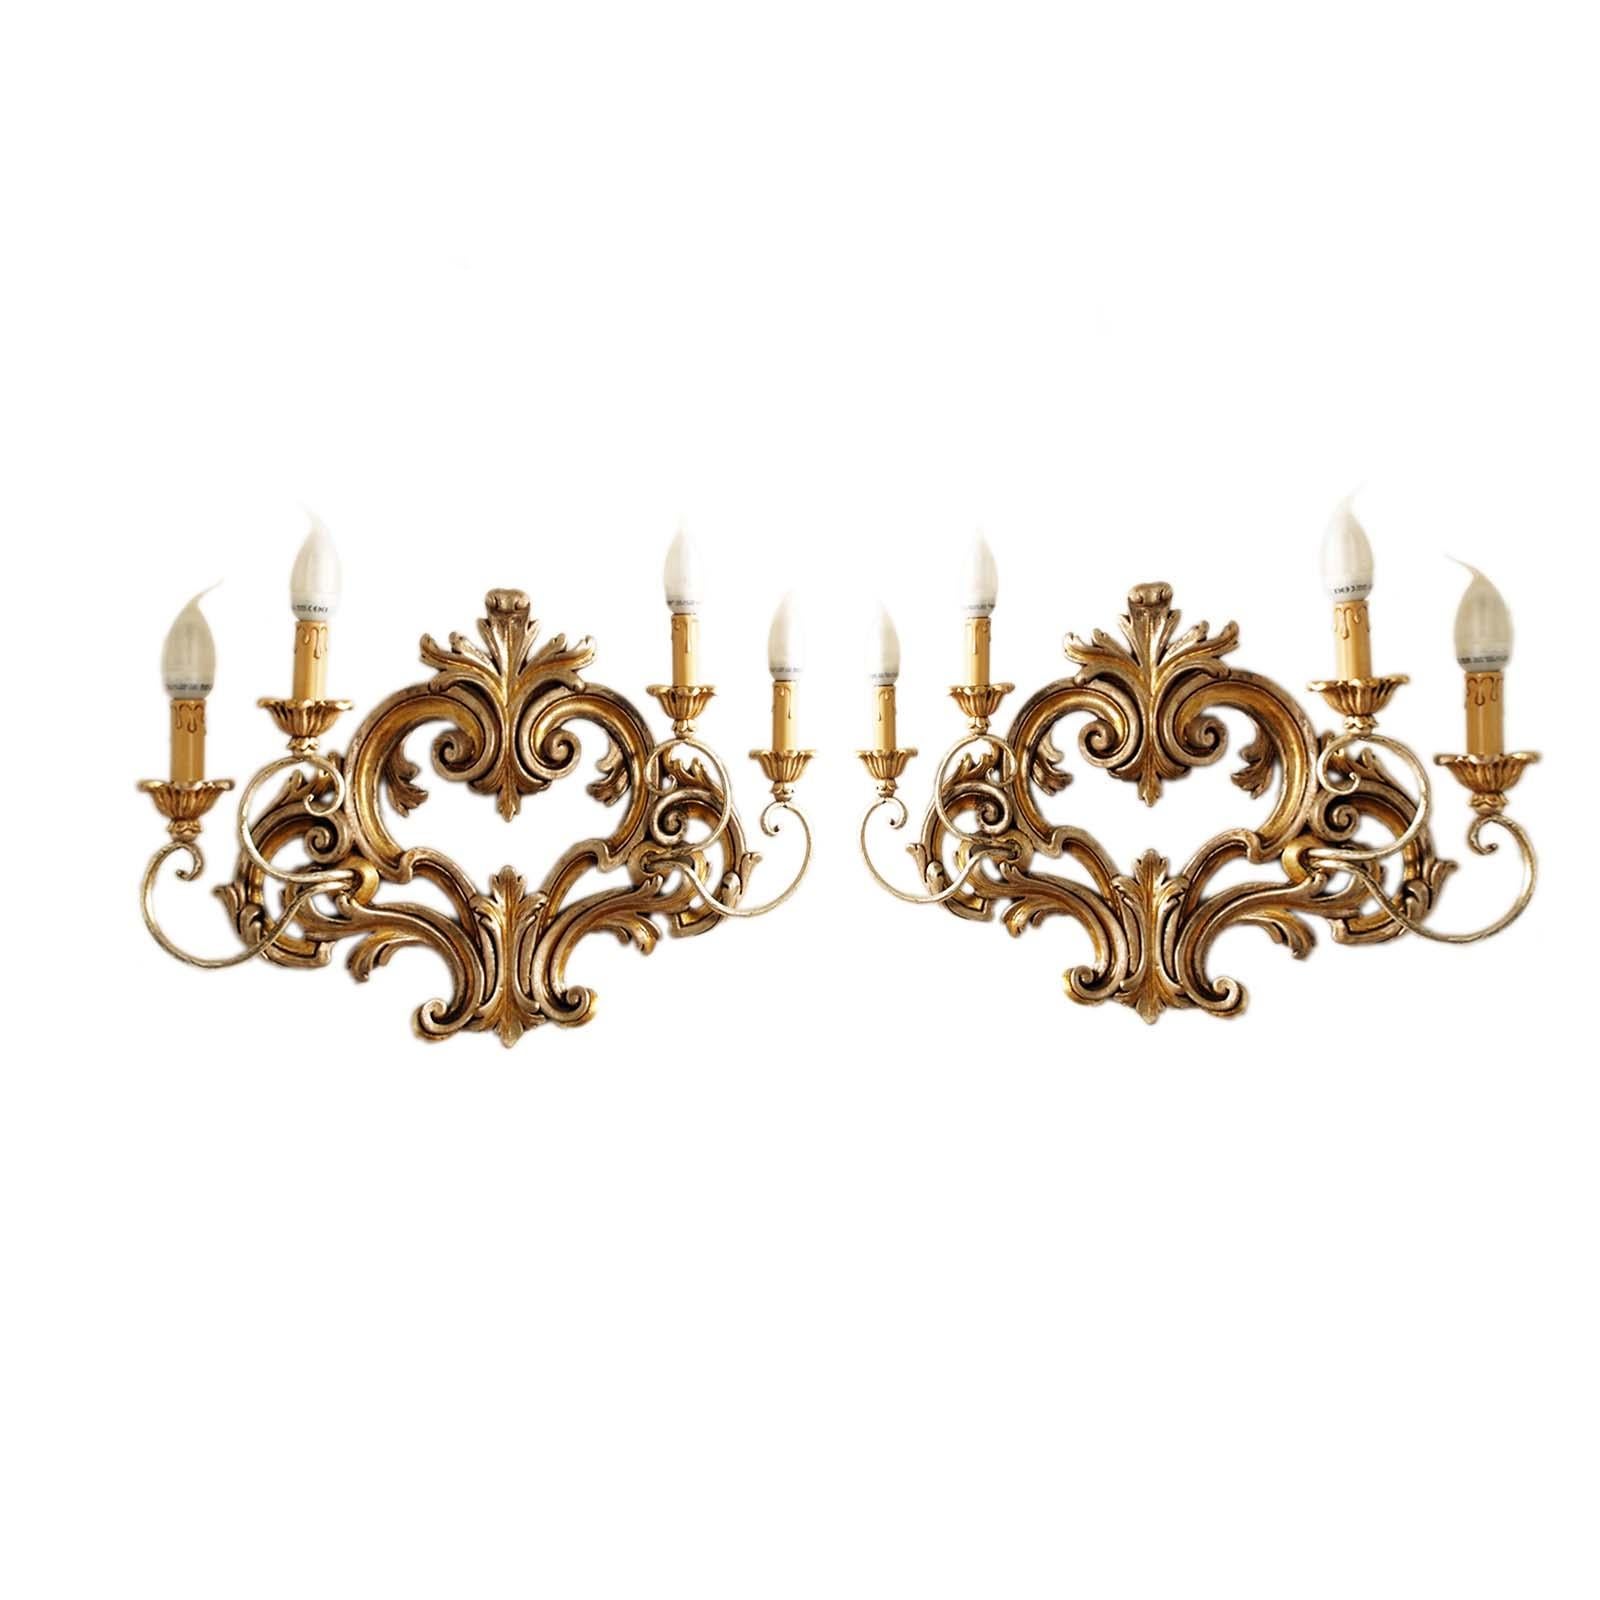 Early 20th Century Large Pair of Ornamental Carved and Gilded Wood Sconces, Venetian work by Testolini Freres. Their harmony and elegance makes your environment precious.
The electrical system has been overhauled and is working: ready for use

